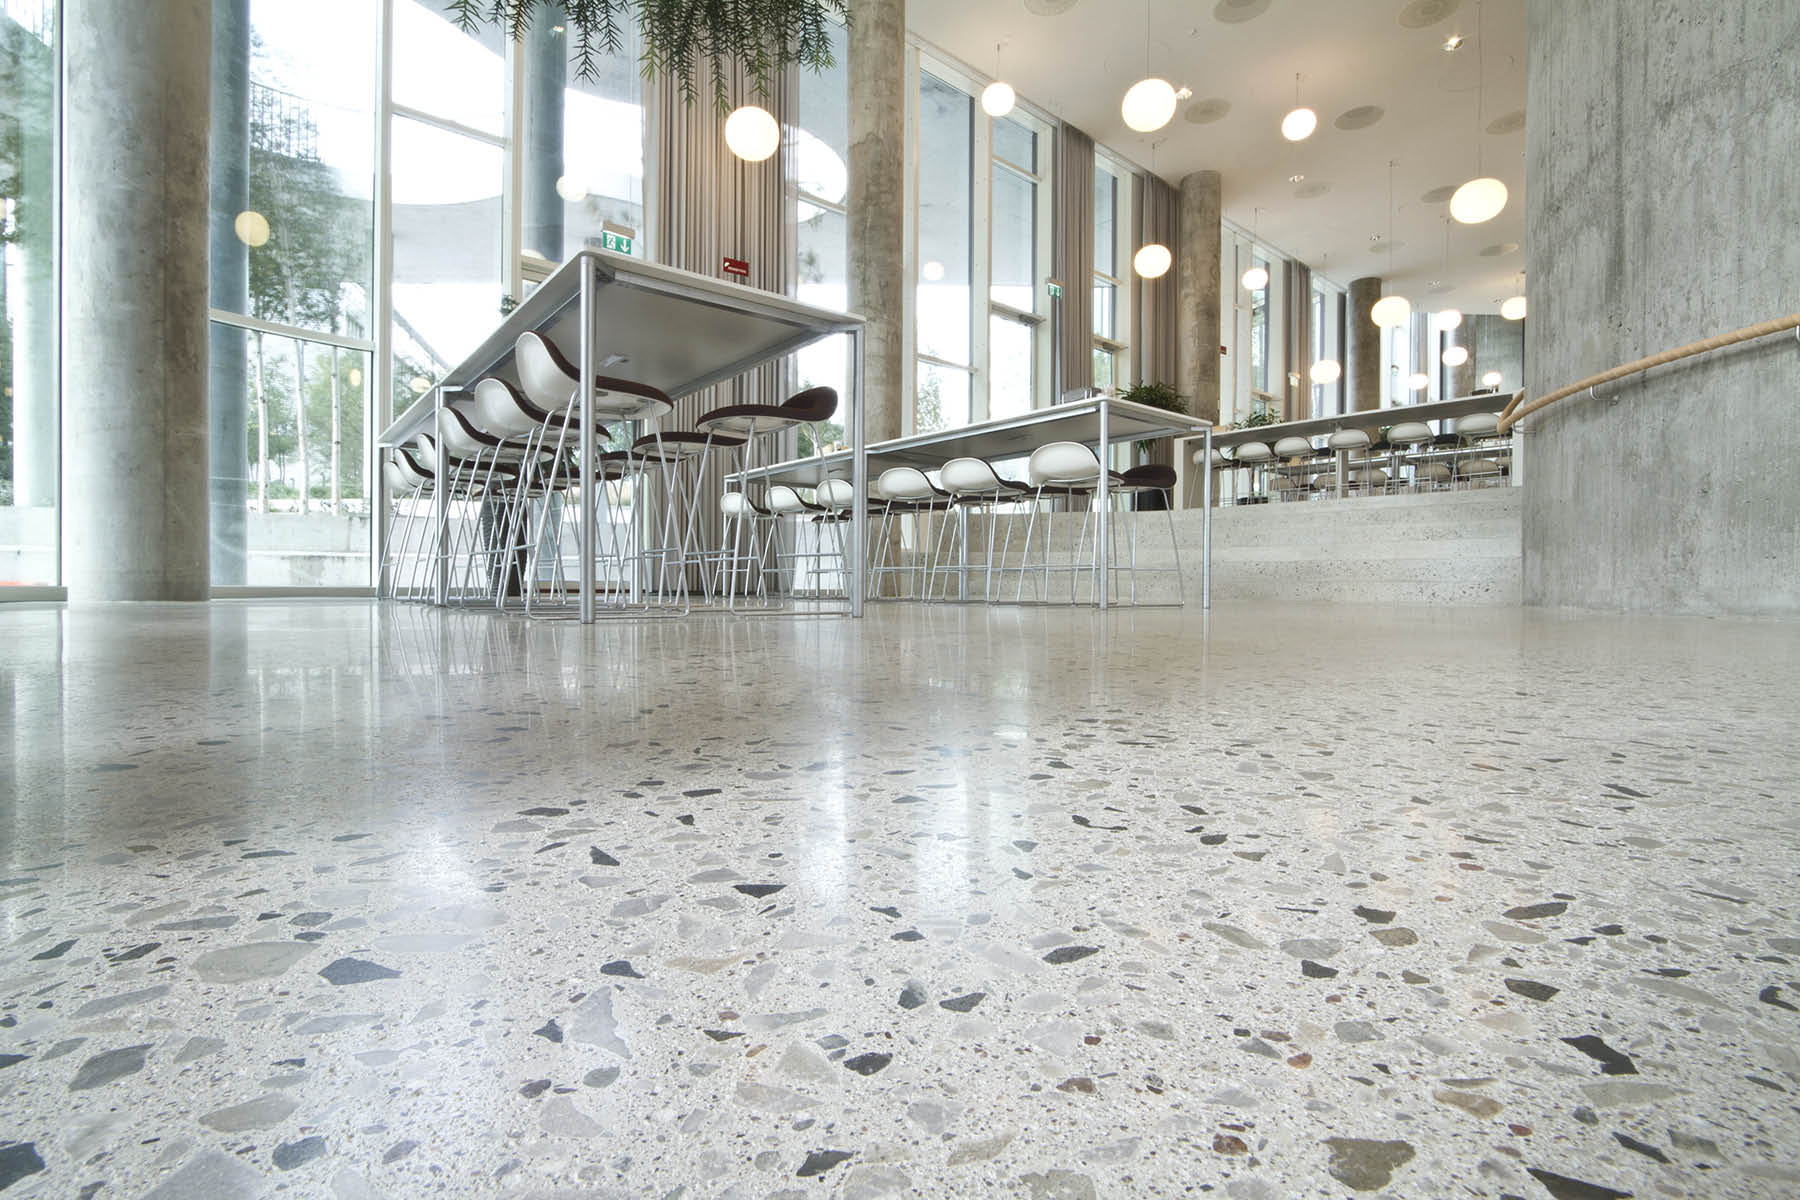 Not all shiny floors are refined polished concrete floors such as this one created with the Husqvarna HiperFloor system. To help the industry deliver more consistent, high-quality floors, task forces are developing guidelines to establish industry-wide specifications for polished floors. Photos courtesy of Husqvarna Construction Products/HTC